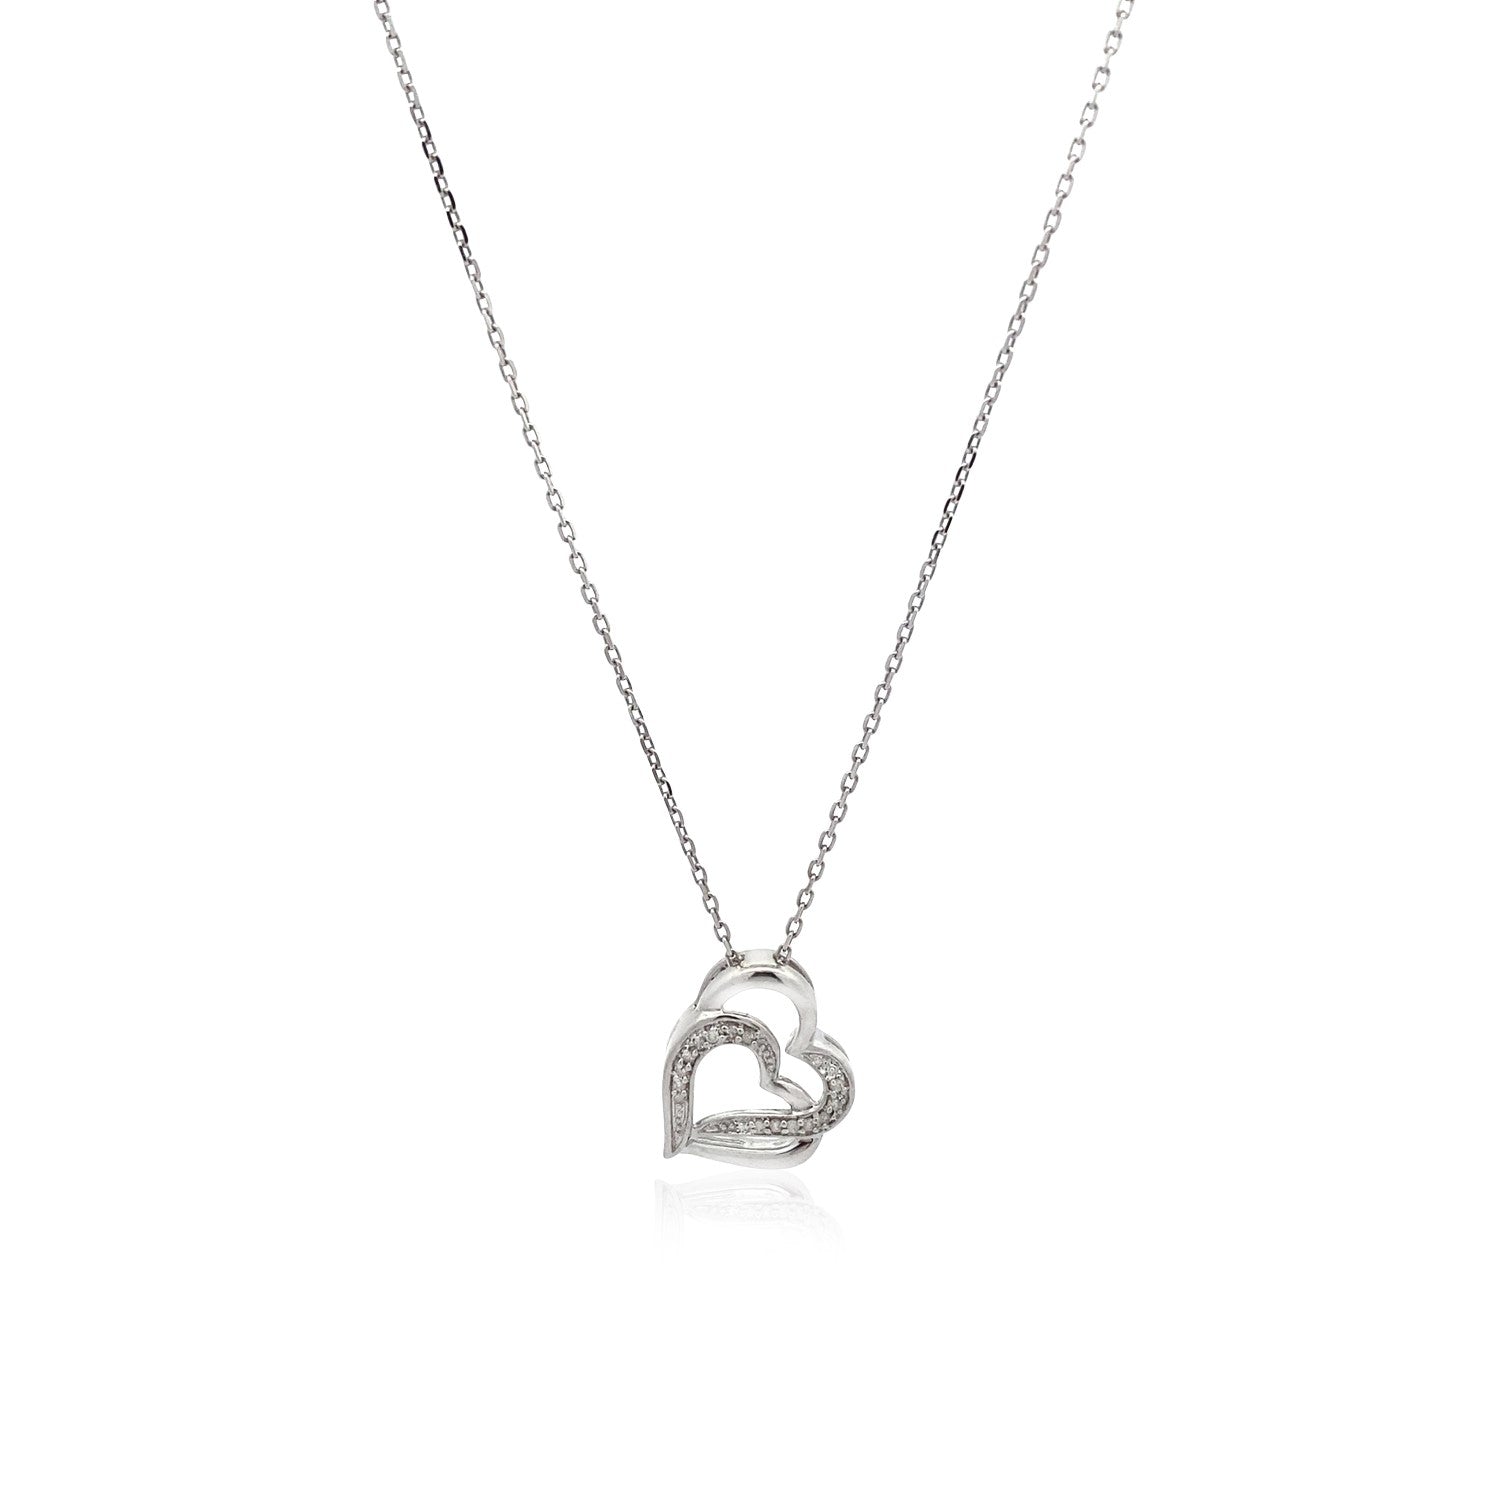 Sterling Silver Dual Heart Motif Pendant with Diamonds (.06 cttw)